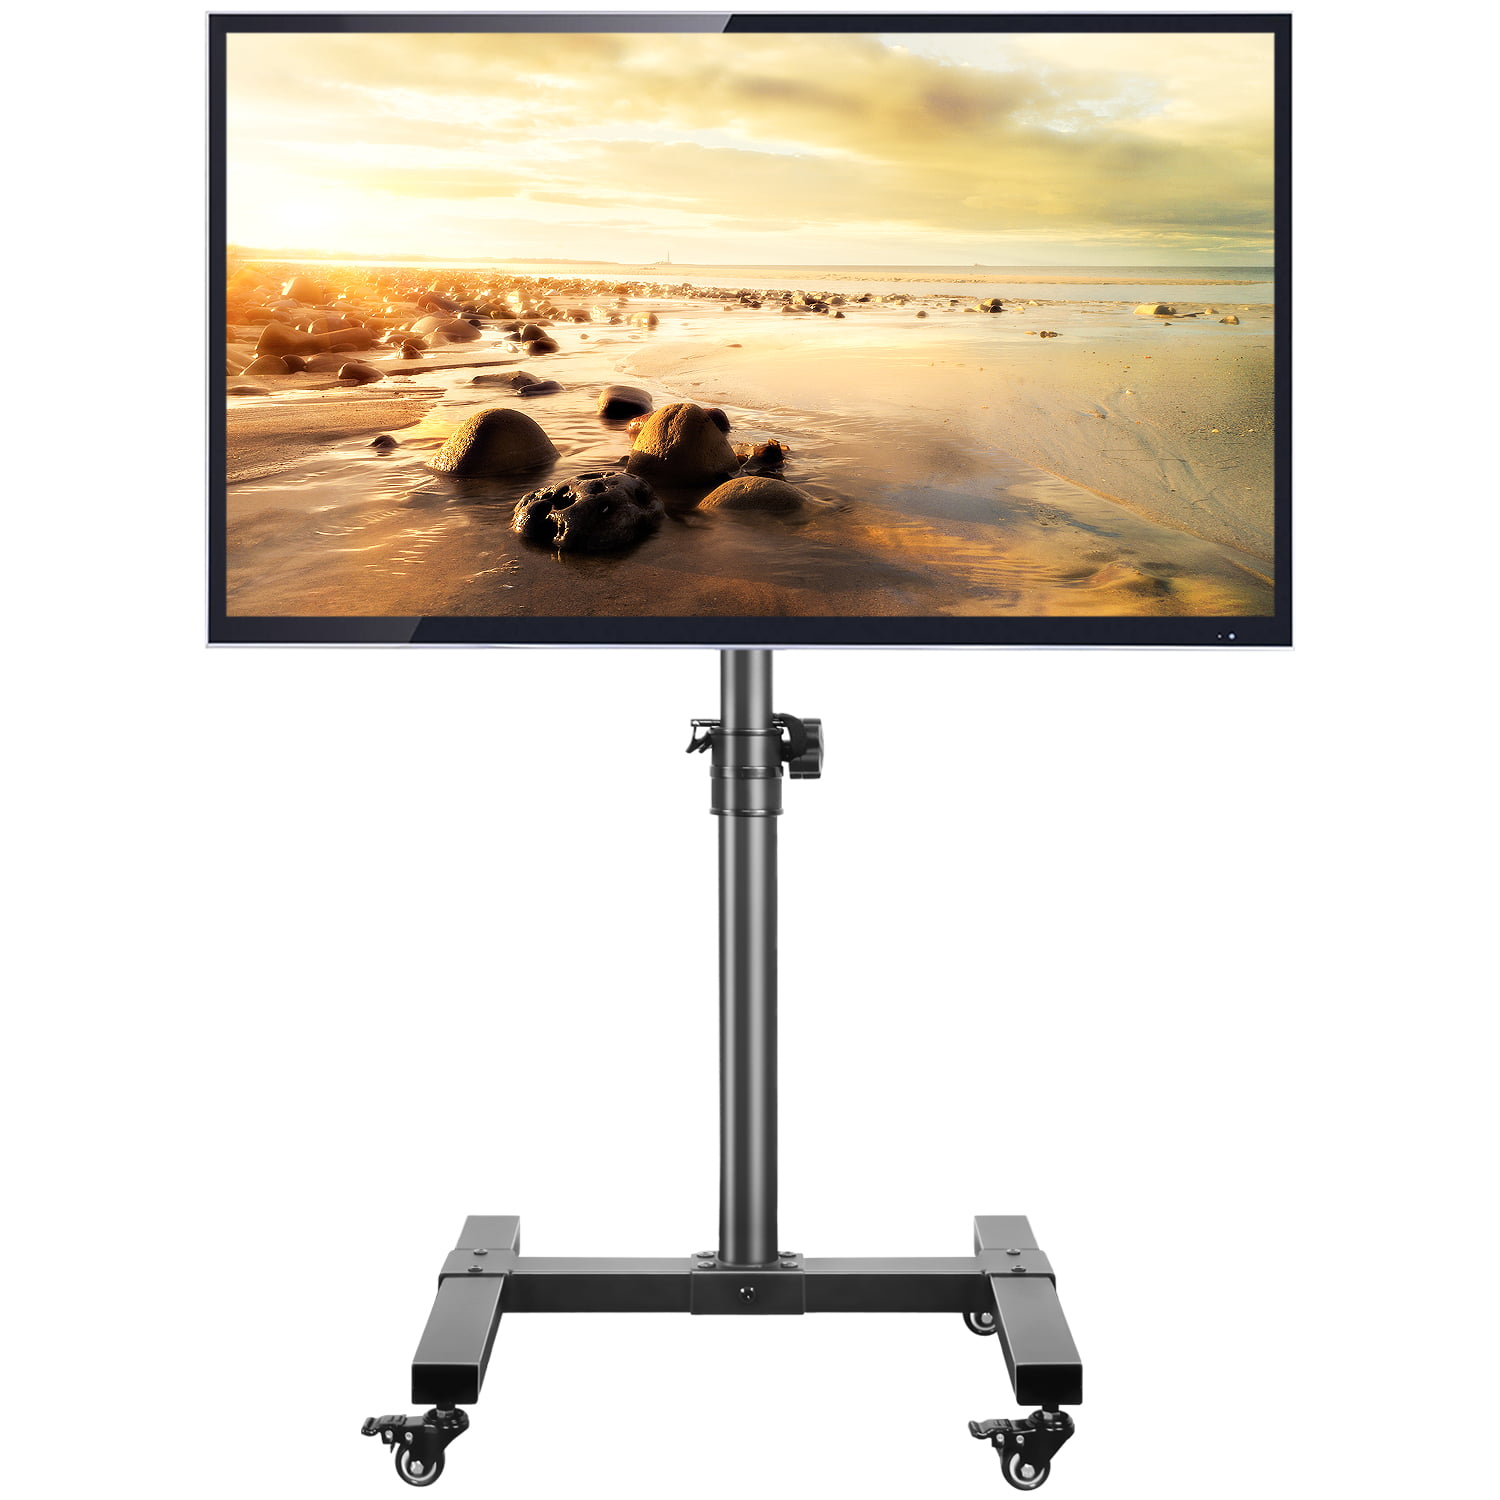 Portable Tripod TV Stand with Swivel & Tilt Mount for 32"-70" Flat Screens TVs 